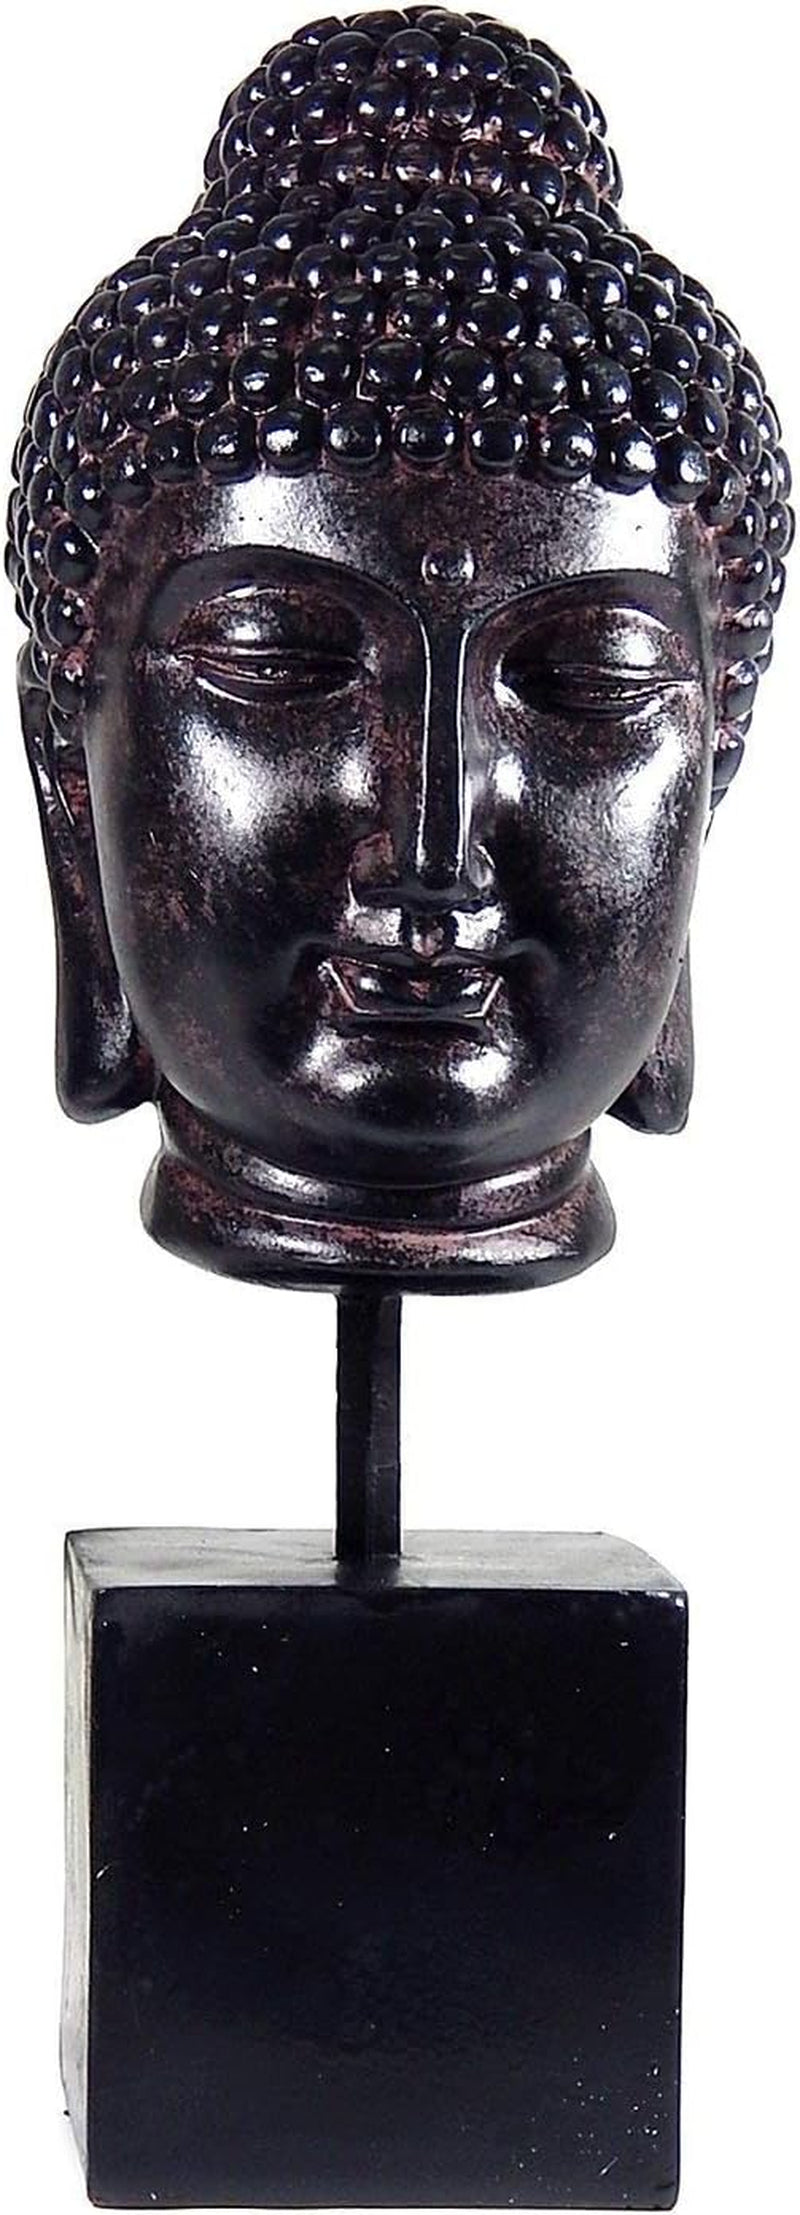 Buddha Head Statue Retro Rustic Vintage Decorative Bookends Bookshelves Stopper Support Heavy Duty Non Skid Book Ends Home Accents Bodhi Bust Buda Calming Zen Meditation